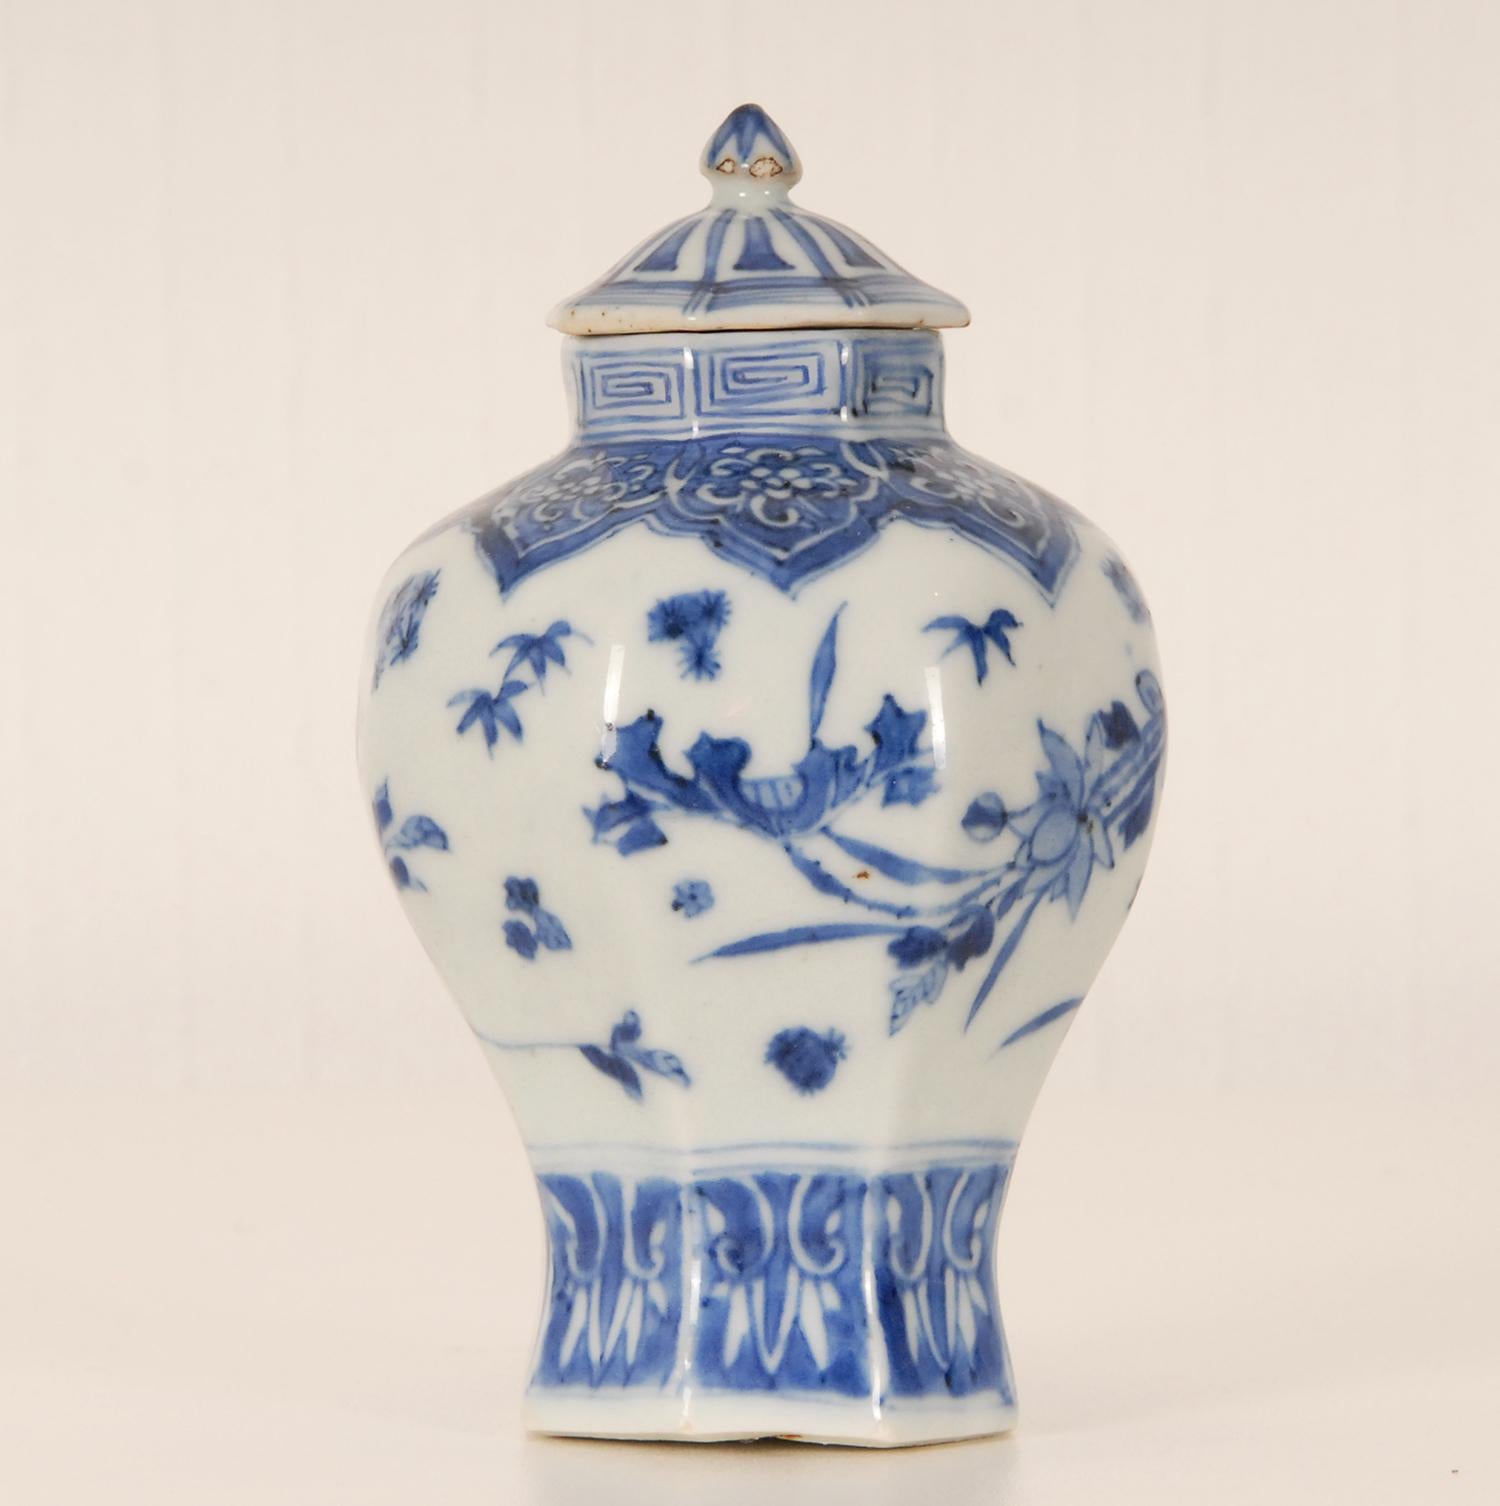 17th century Chinese Ming Porcelain Ceramic Blue and White Vase Covered In Good Condition For Sale In Wommelgem, VAN